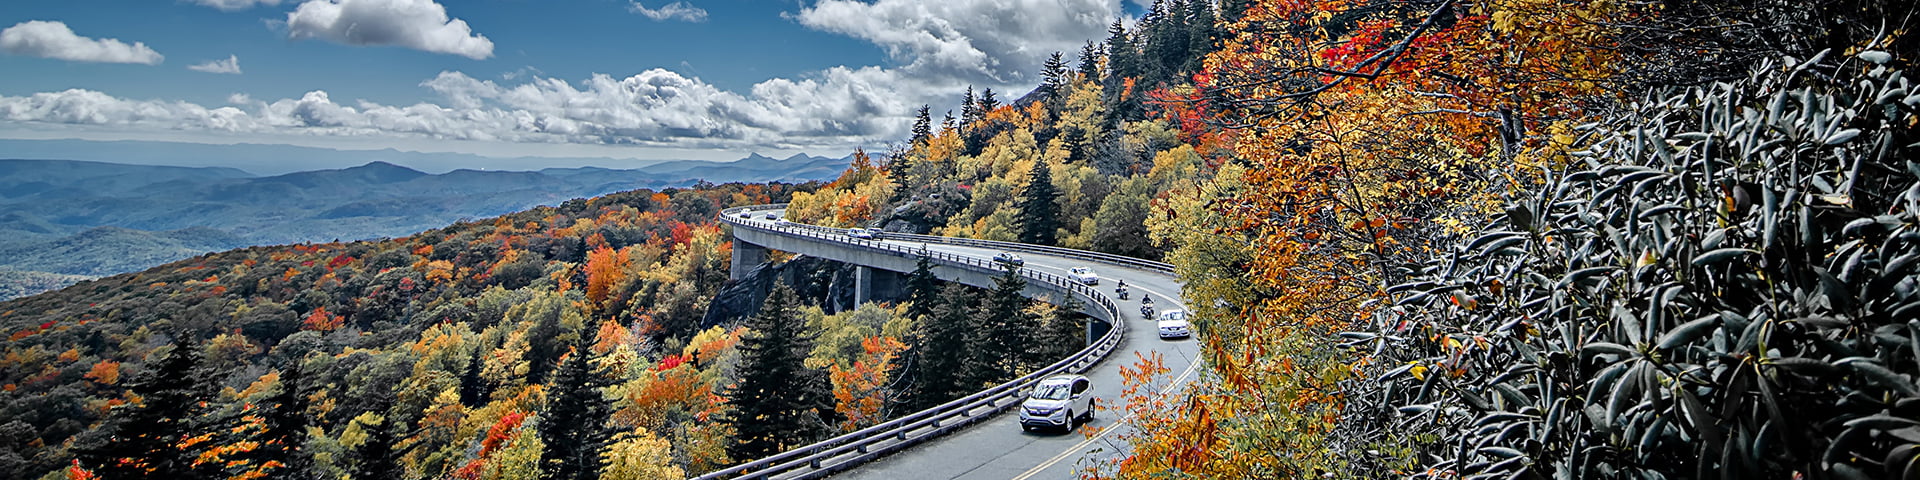 Scene of fall color along the Blue Ridge Parkway including span of the Grandfather Mountian bridge